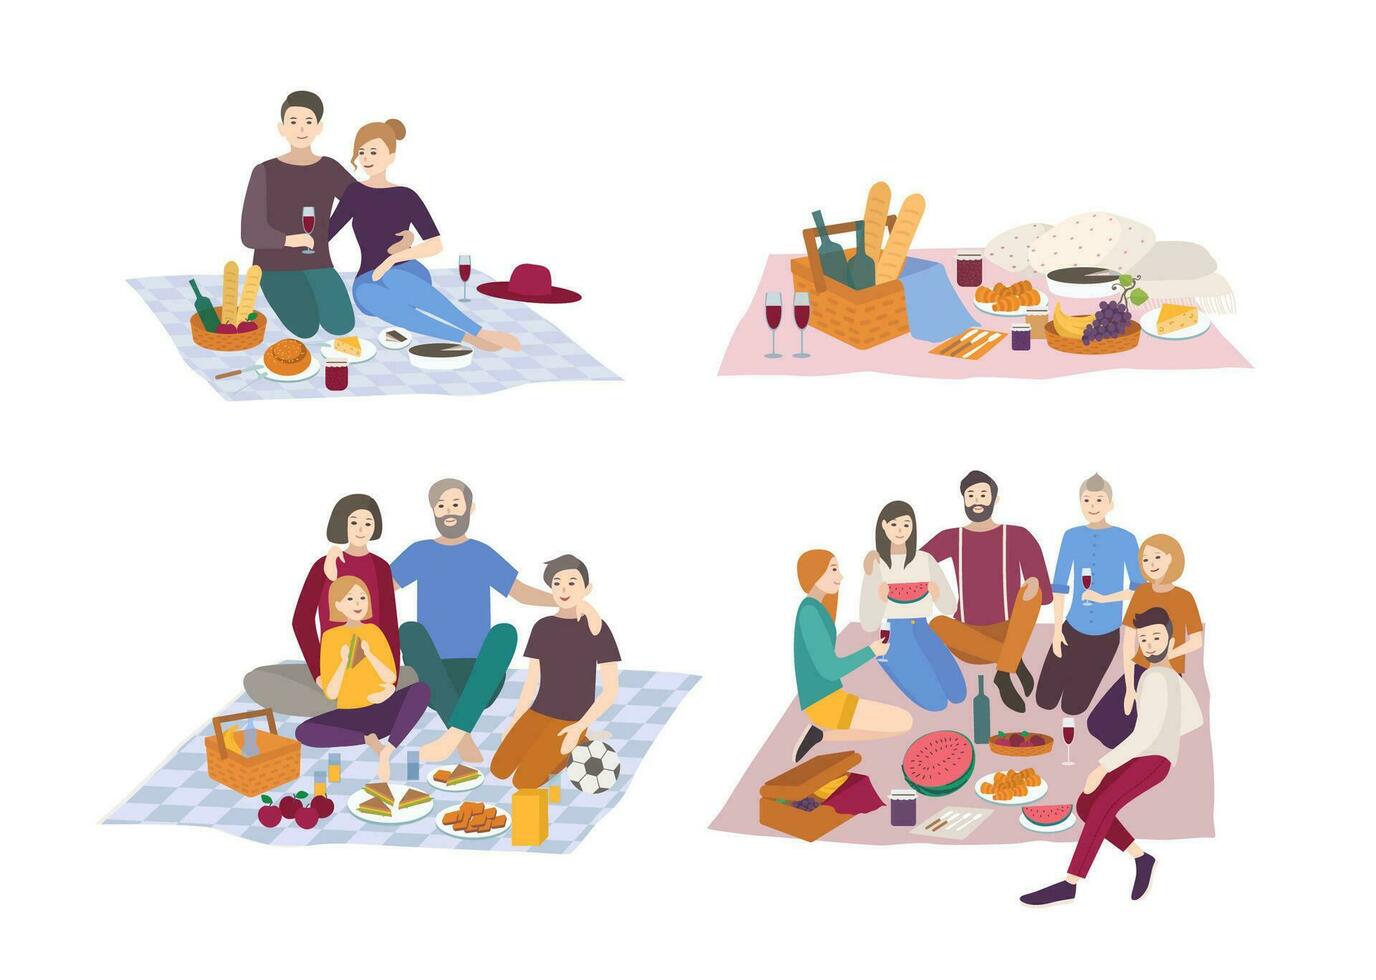 Picnic in park, vector illustration set. Couple, friends, family, outdoors. people recreation scene in flat style.